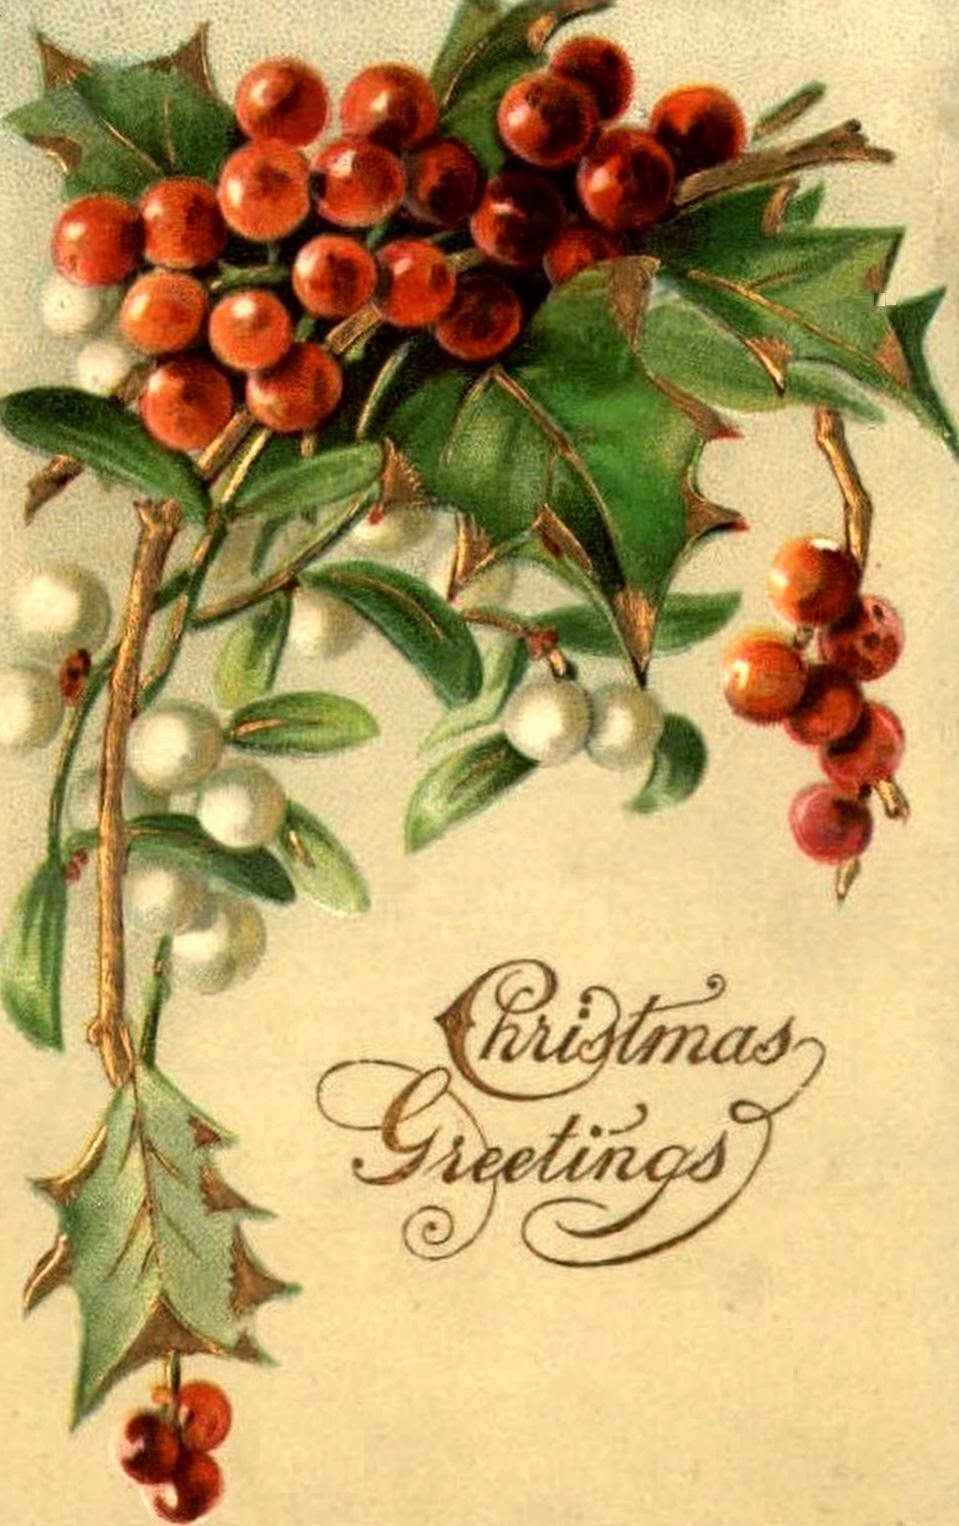 bumble button: Beautiful Antique Postcards featuring Sprigs of Holly